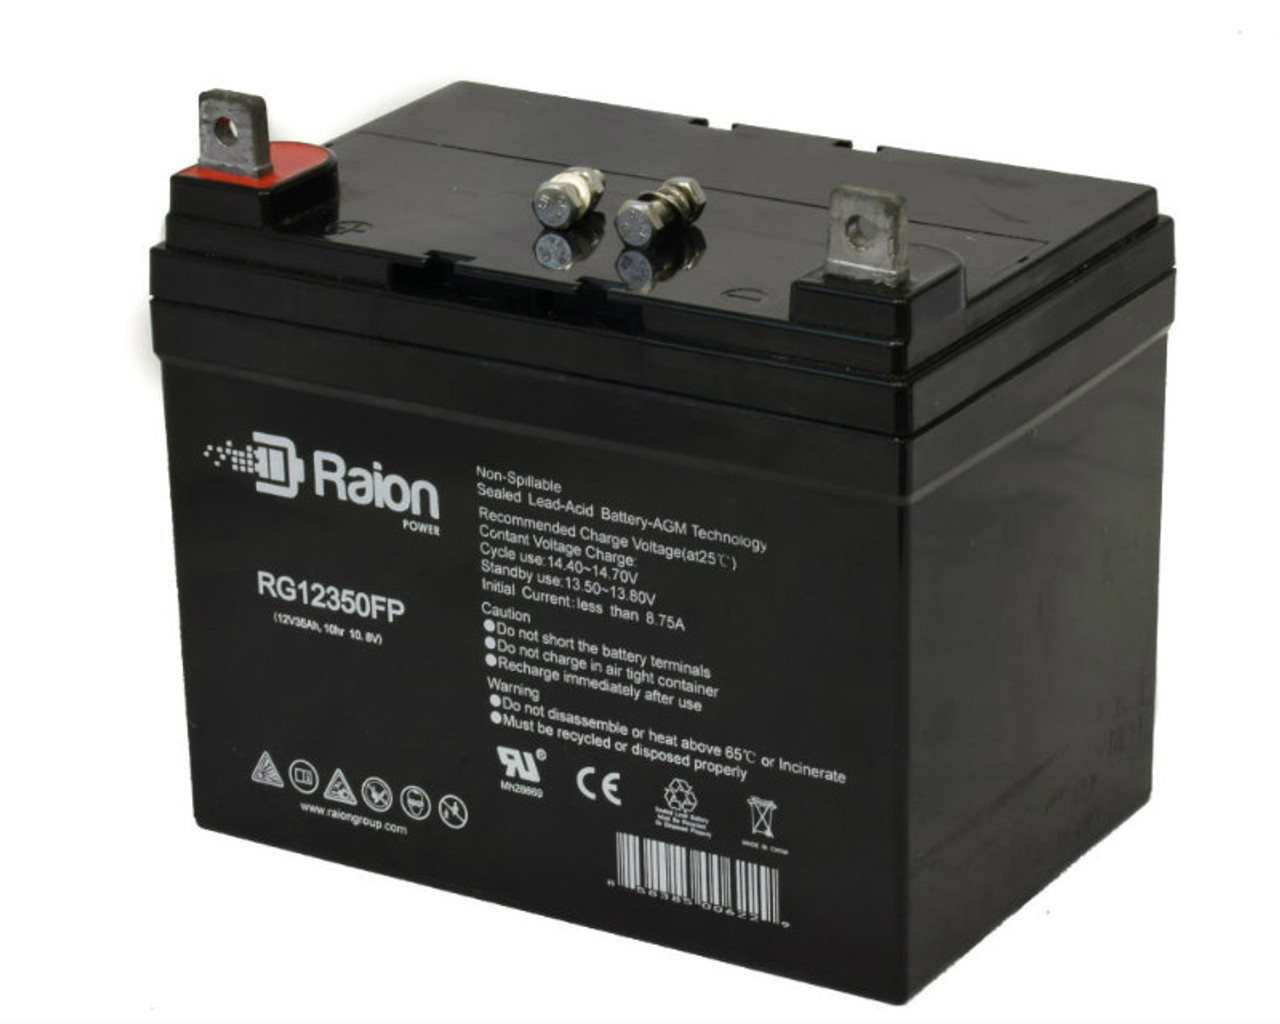 Raion Power Replacement 12V 35Ah RG12350FP Mobility Scooter Battery for A-BEC Suntech Stering Wide